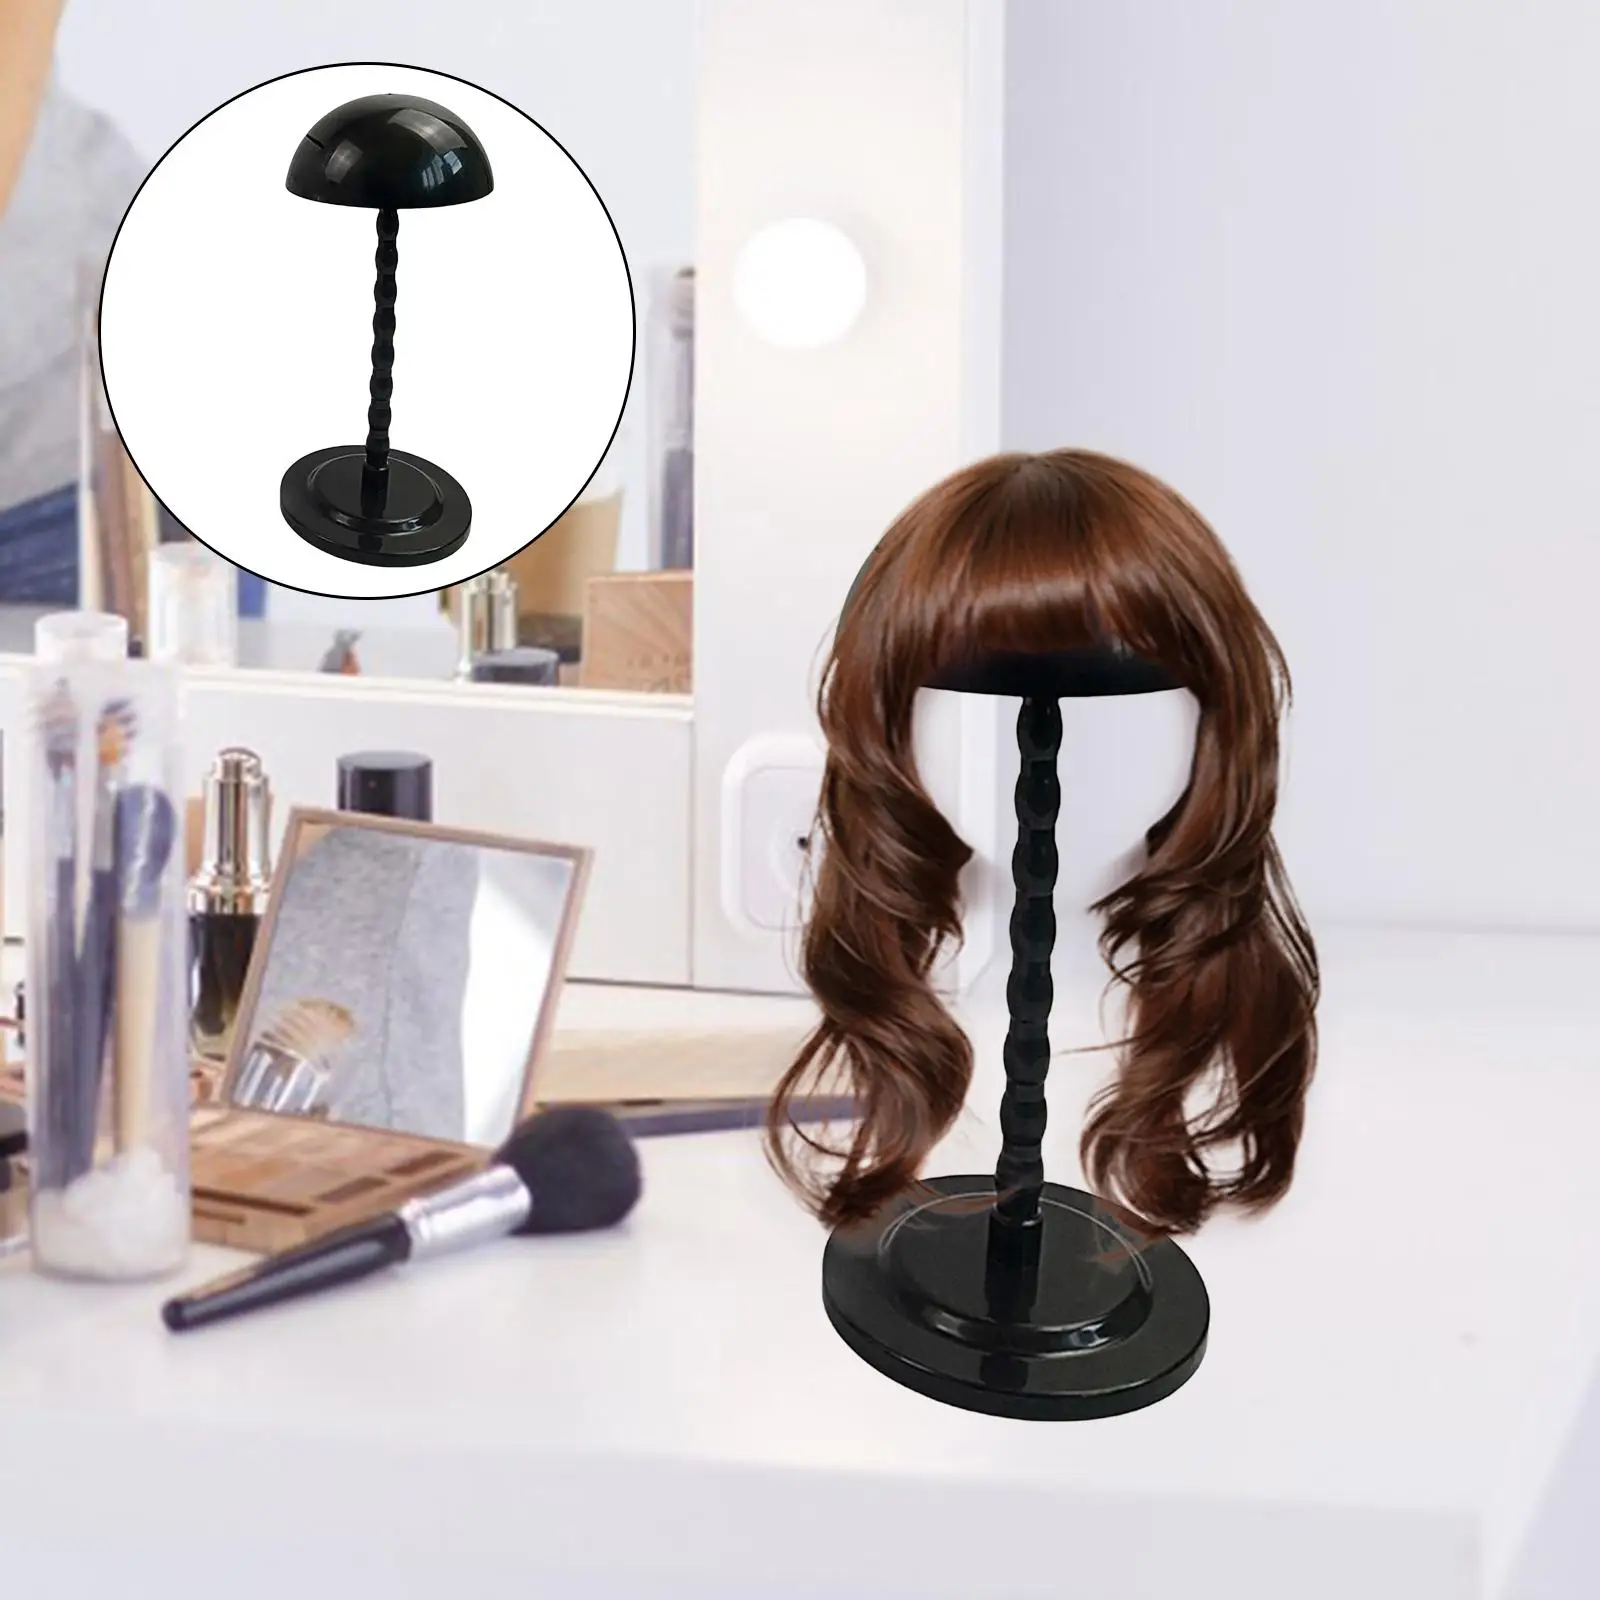  Stand Non-Slip Mushroom Top Collapsible Portable Practical Stable Storage Hair Holder Stands for Drying Toupee Tool